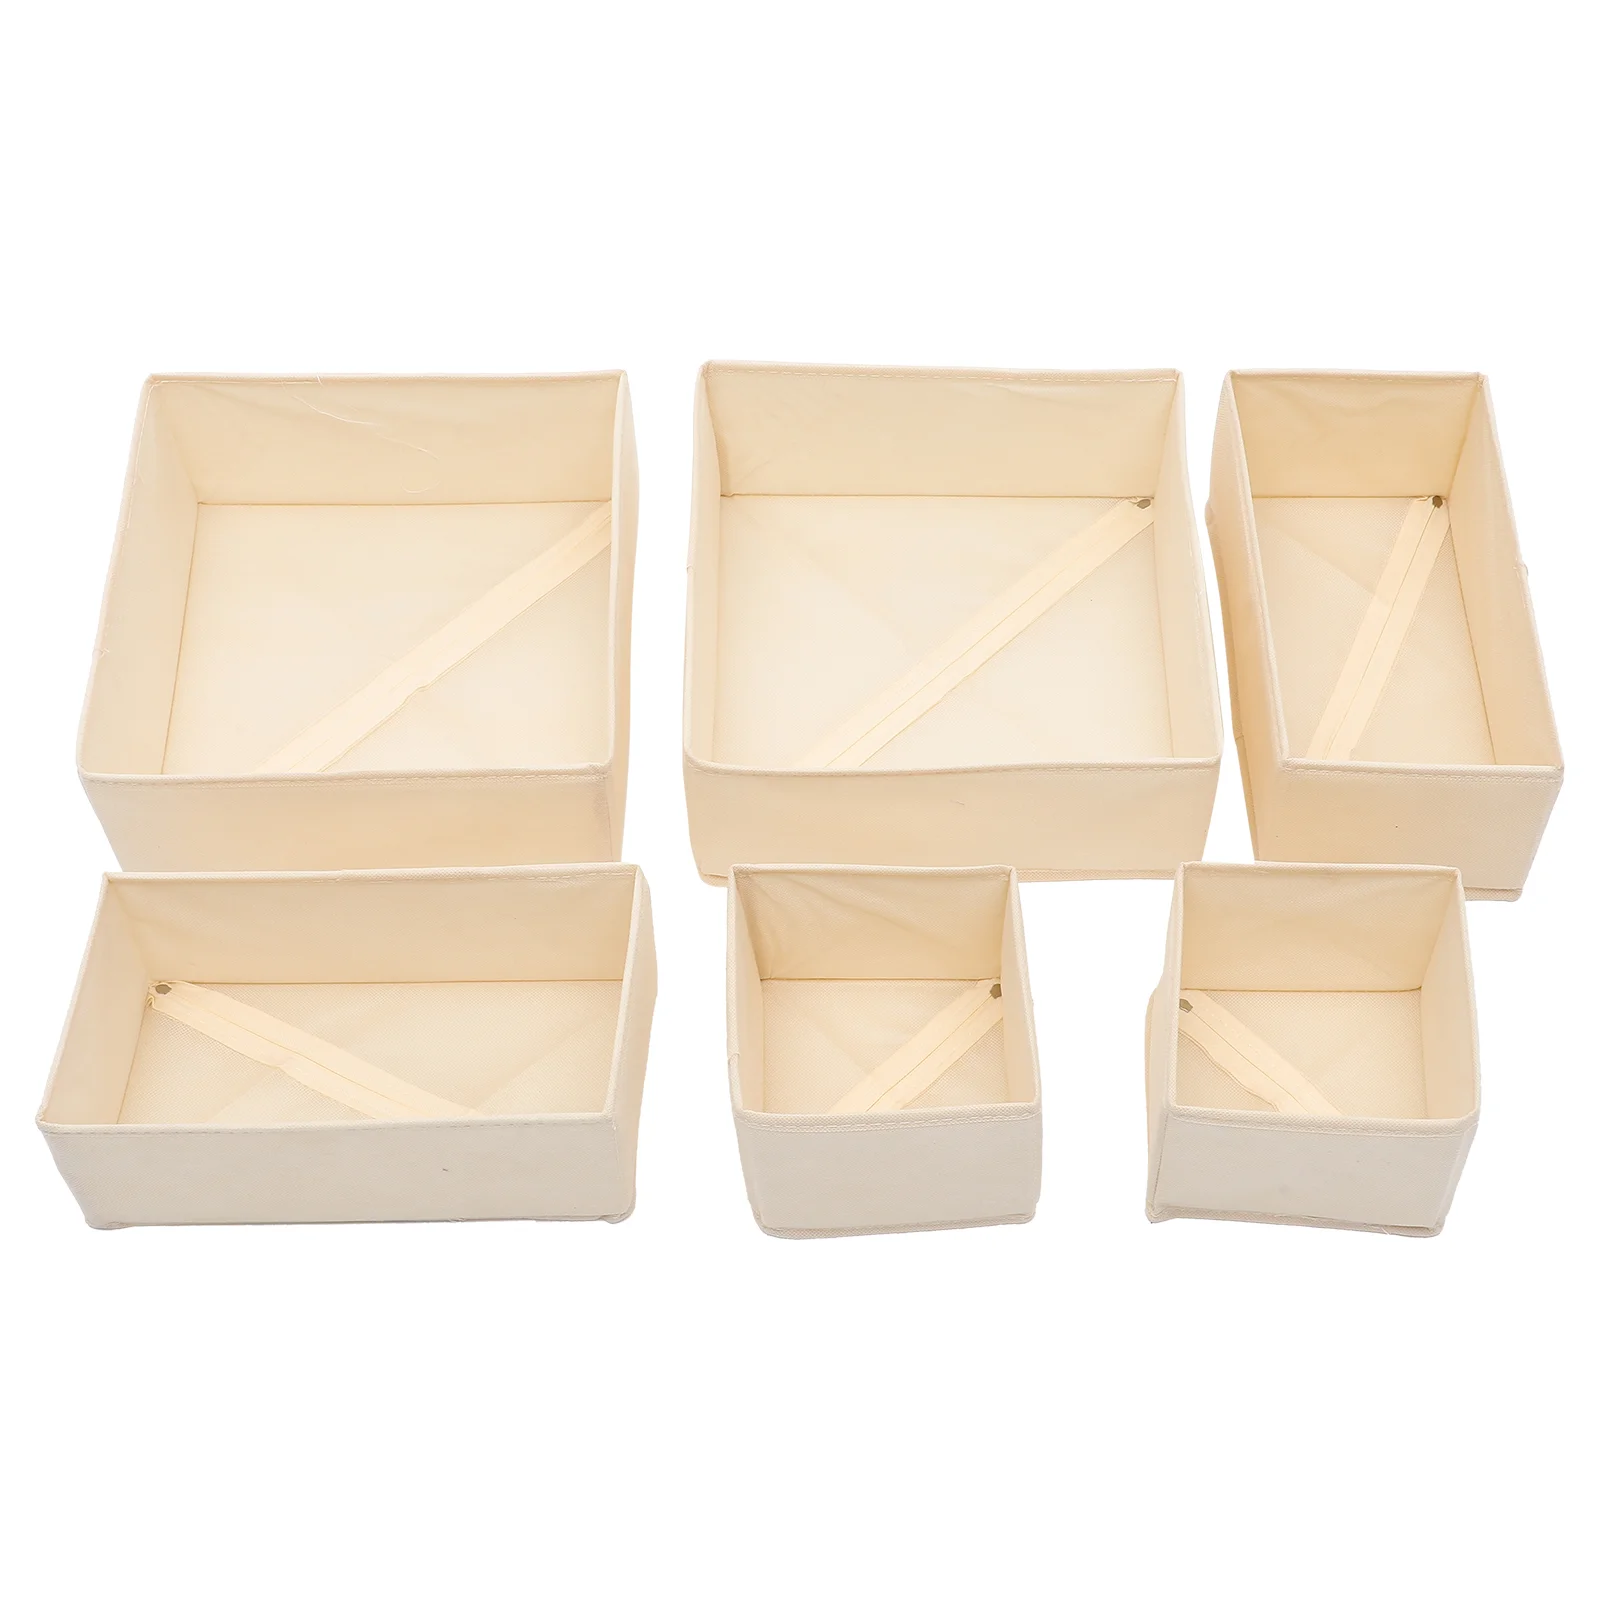 

6 Pcs Clothes Storage Box Wardrobe Containers Holder Cases Drawer Household Organizer Drawers Fabric Sock Dressing room